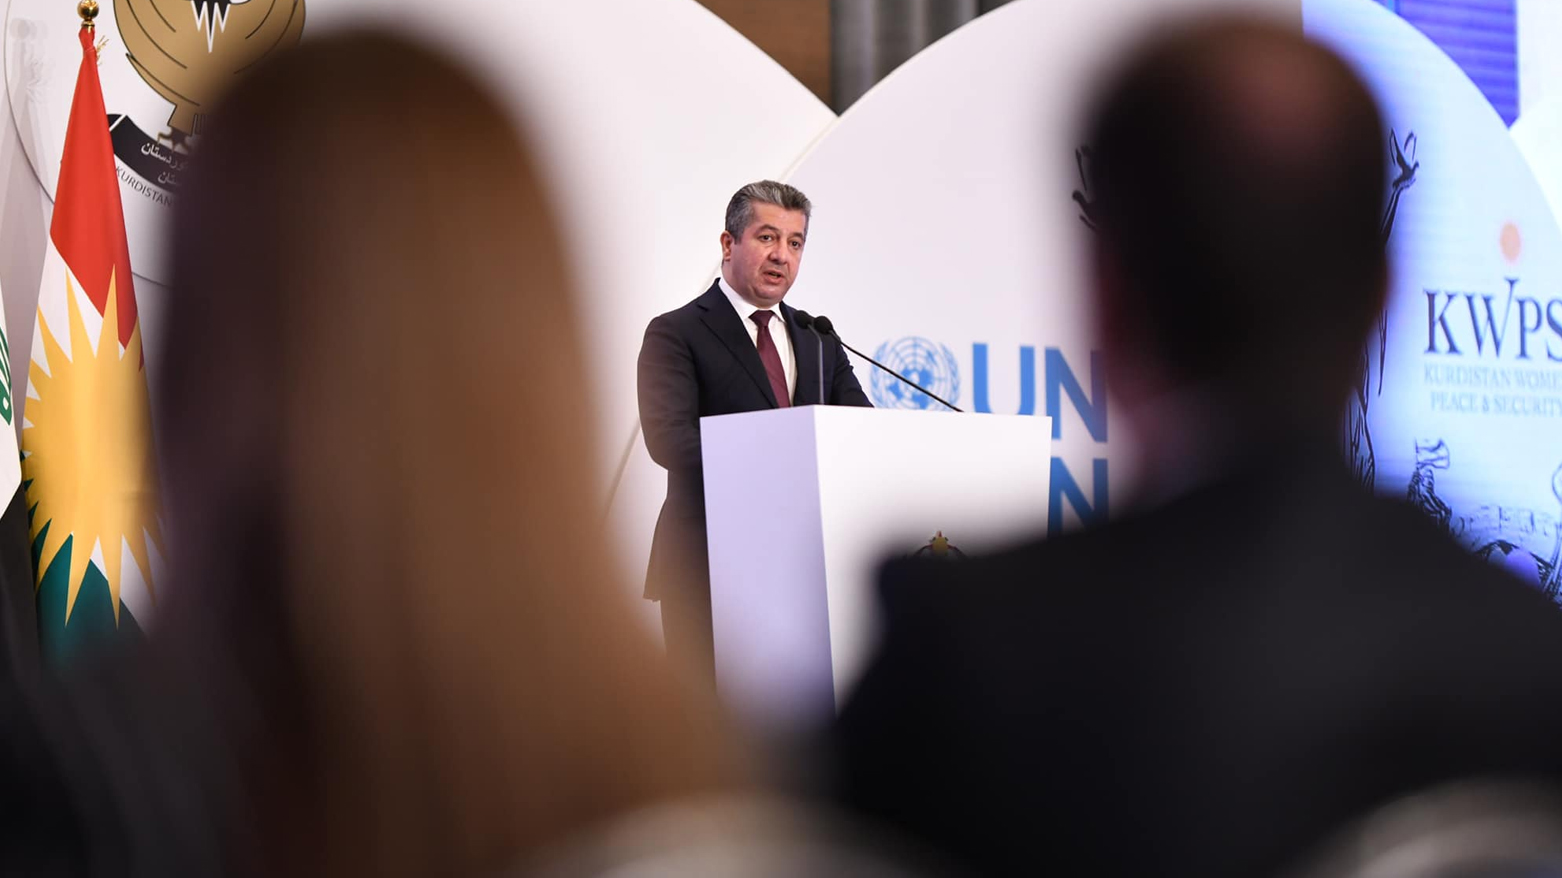 Kurdistan Region Prime Minister Masrour Barzani speaking during an event in Erbil to commemorate a UNSC resolution 1325 on women and peace, Oct. 31, 2023. (Photo: KRG)